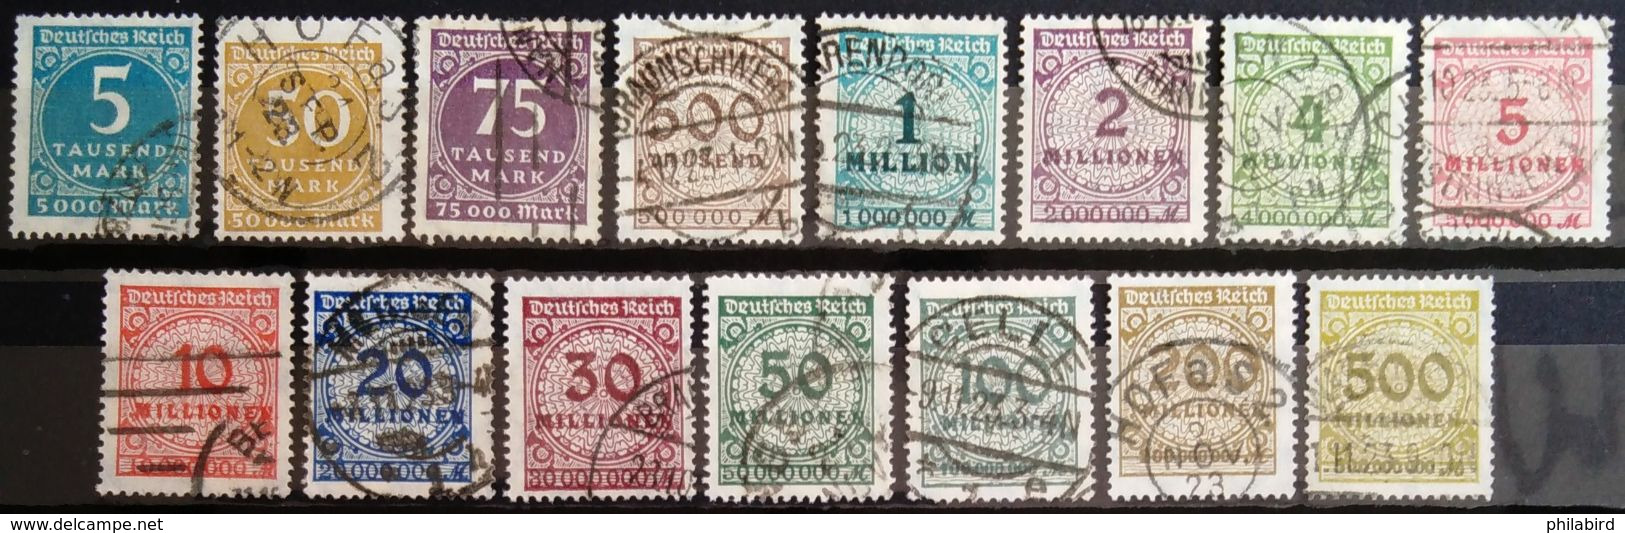 ALLEMAGNE EMPIRE                       N° 291/305                   OBLITERE - Used Stamps